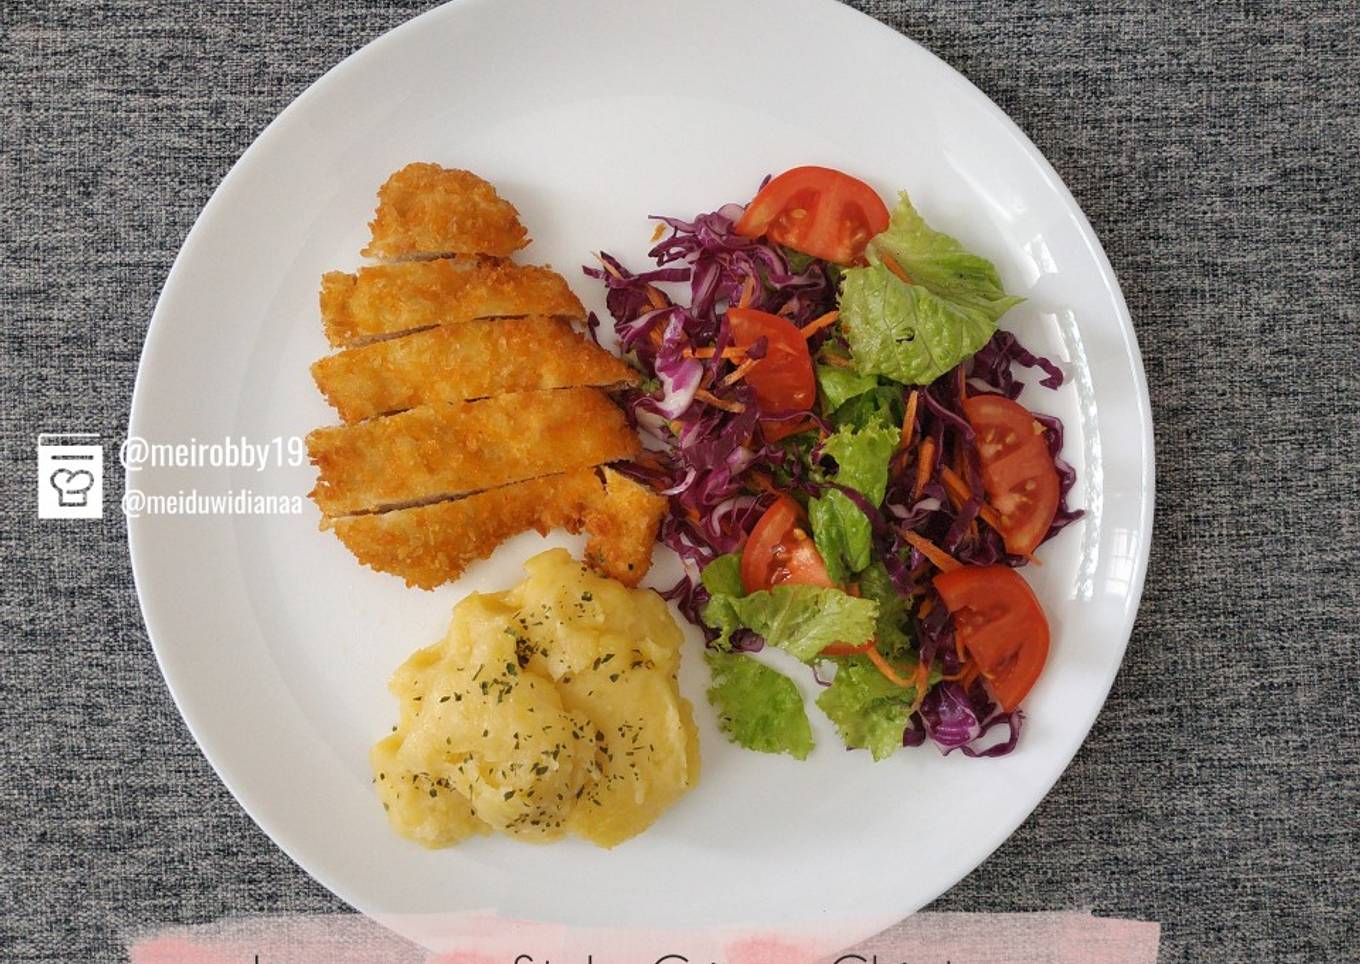 Japanese-Style Crispy Chicken with Mashed Potatoes & Salad Mix